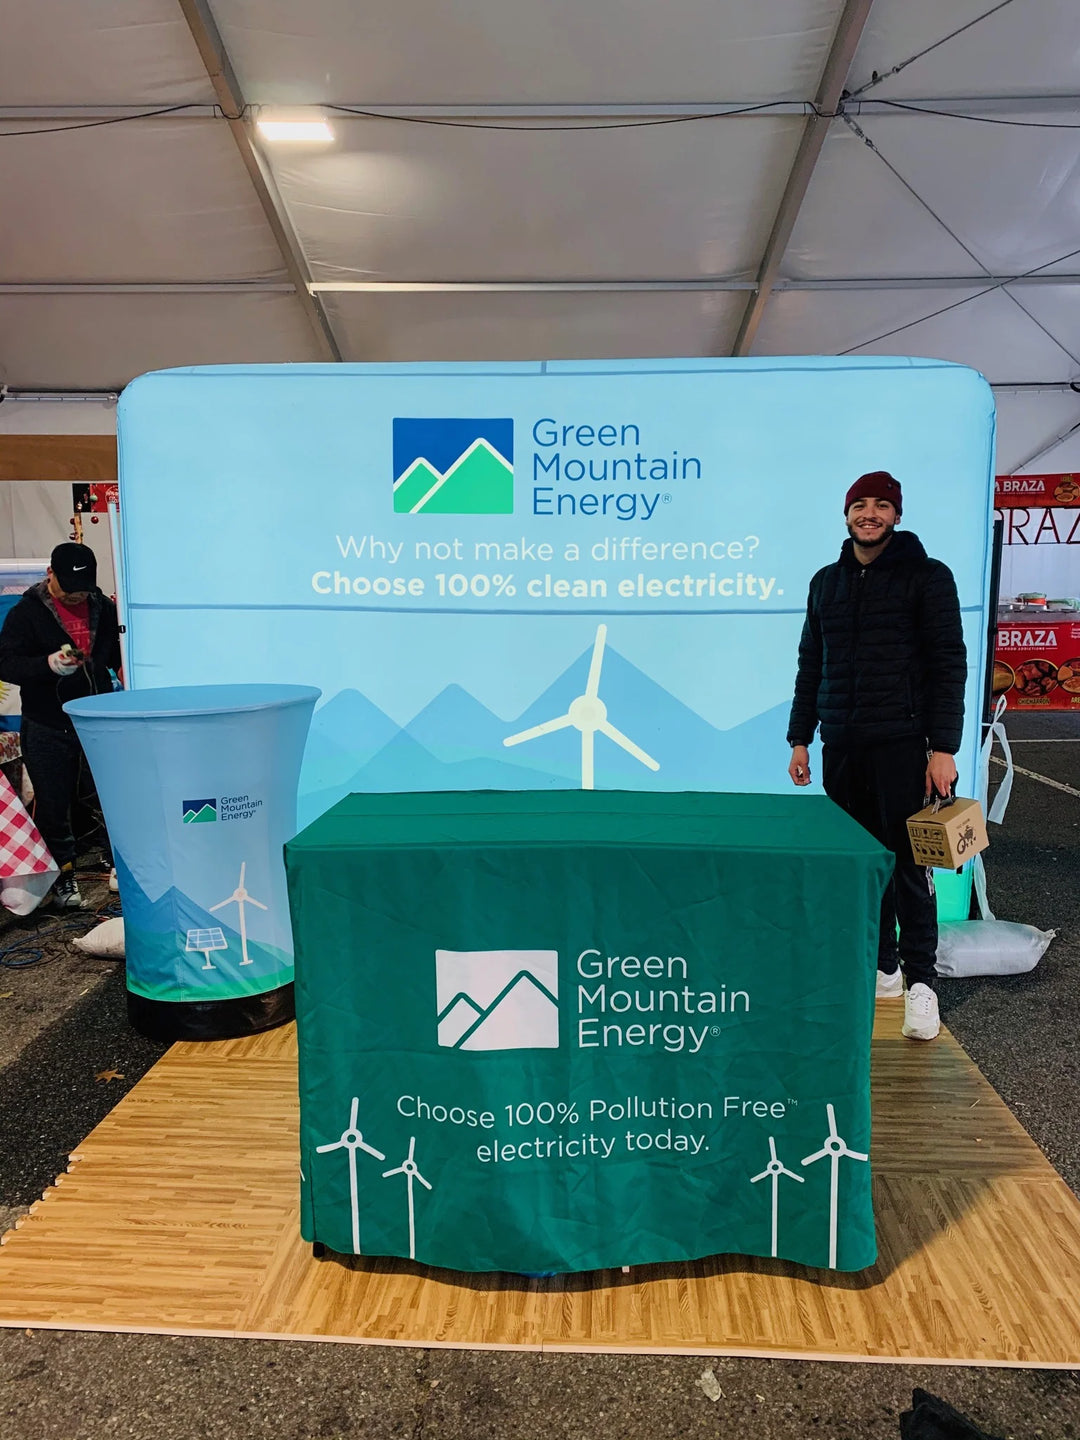 Trade show booth with custom inflatable logo backdrop for Green Mountain Energy